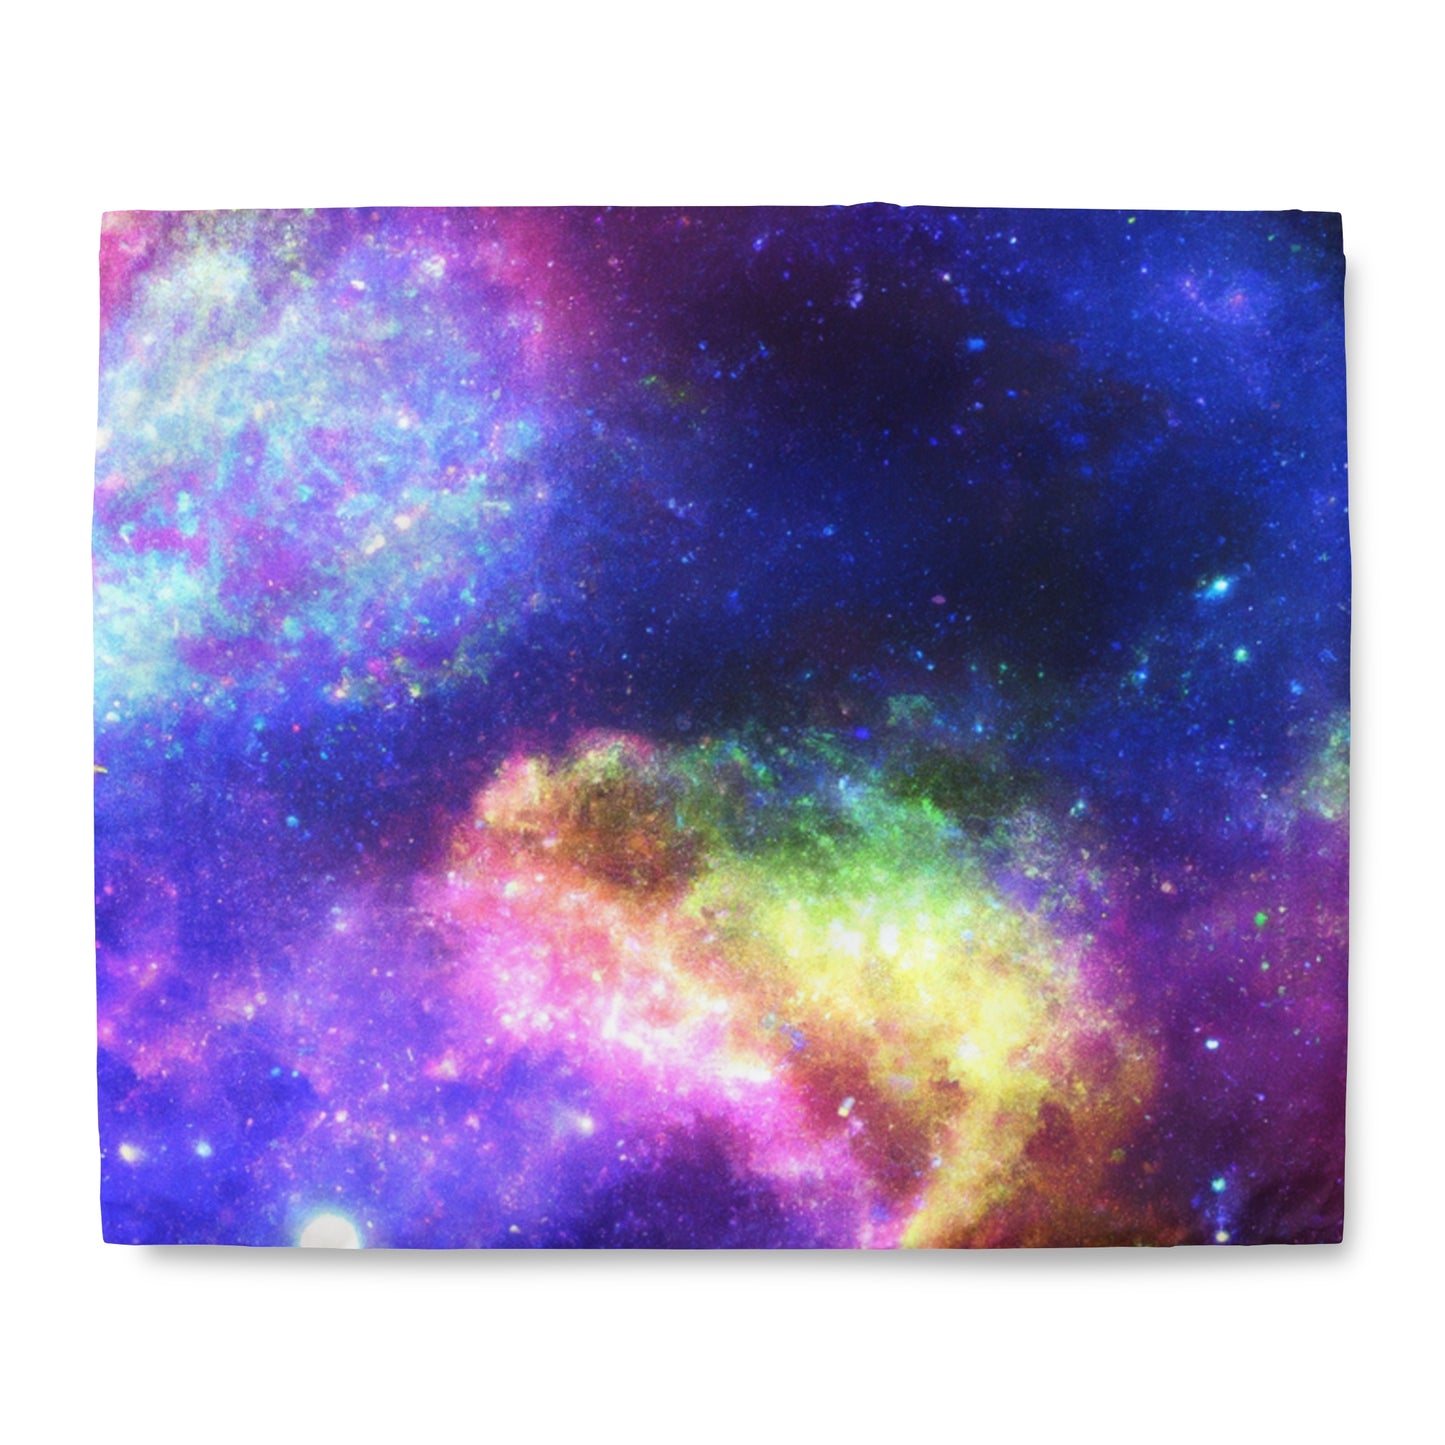 Glimmering Gloria - Astronomy Duvet Bed Cover